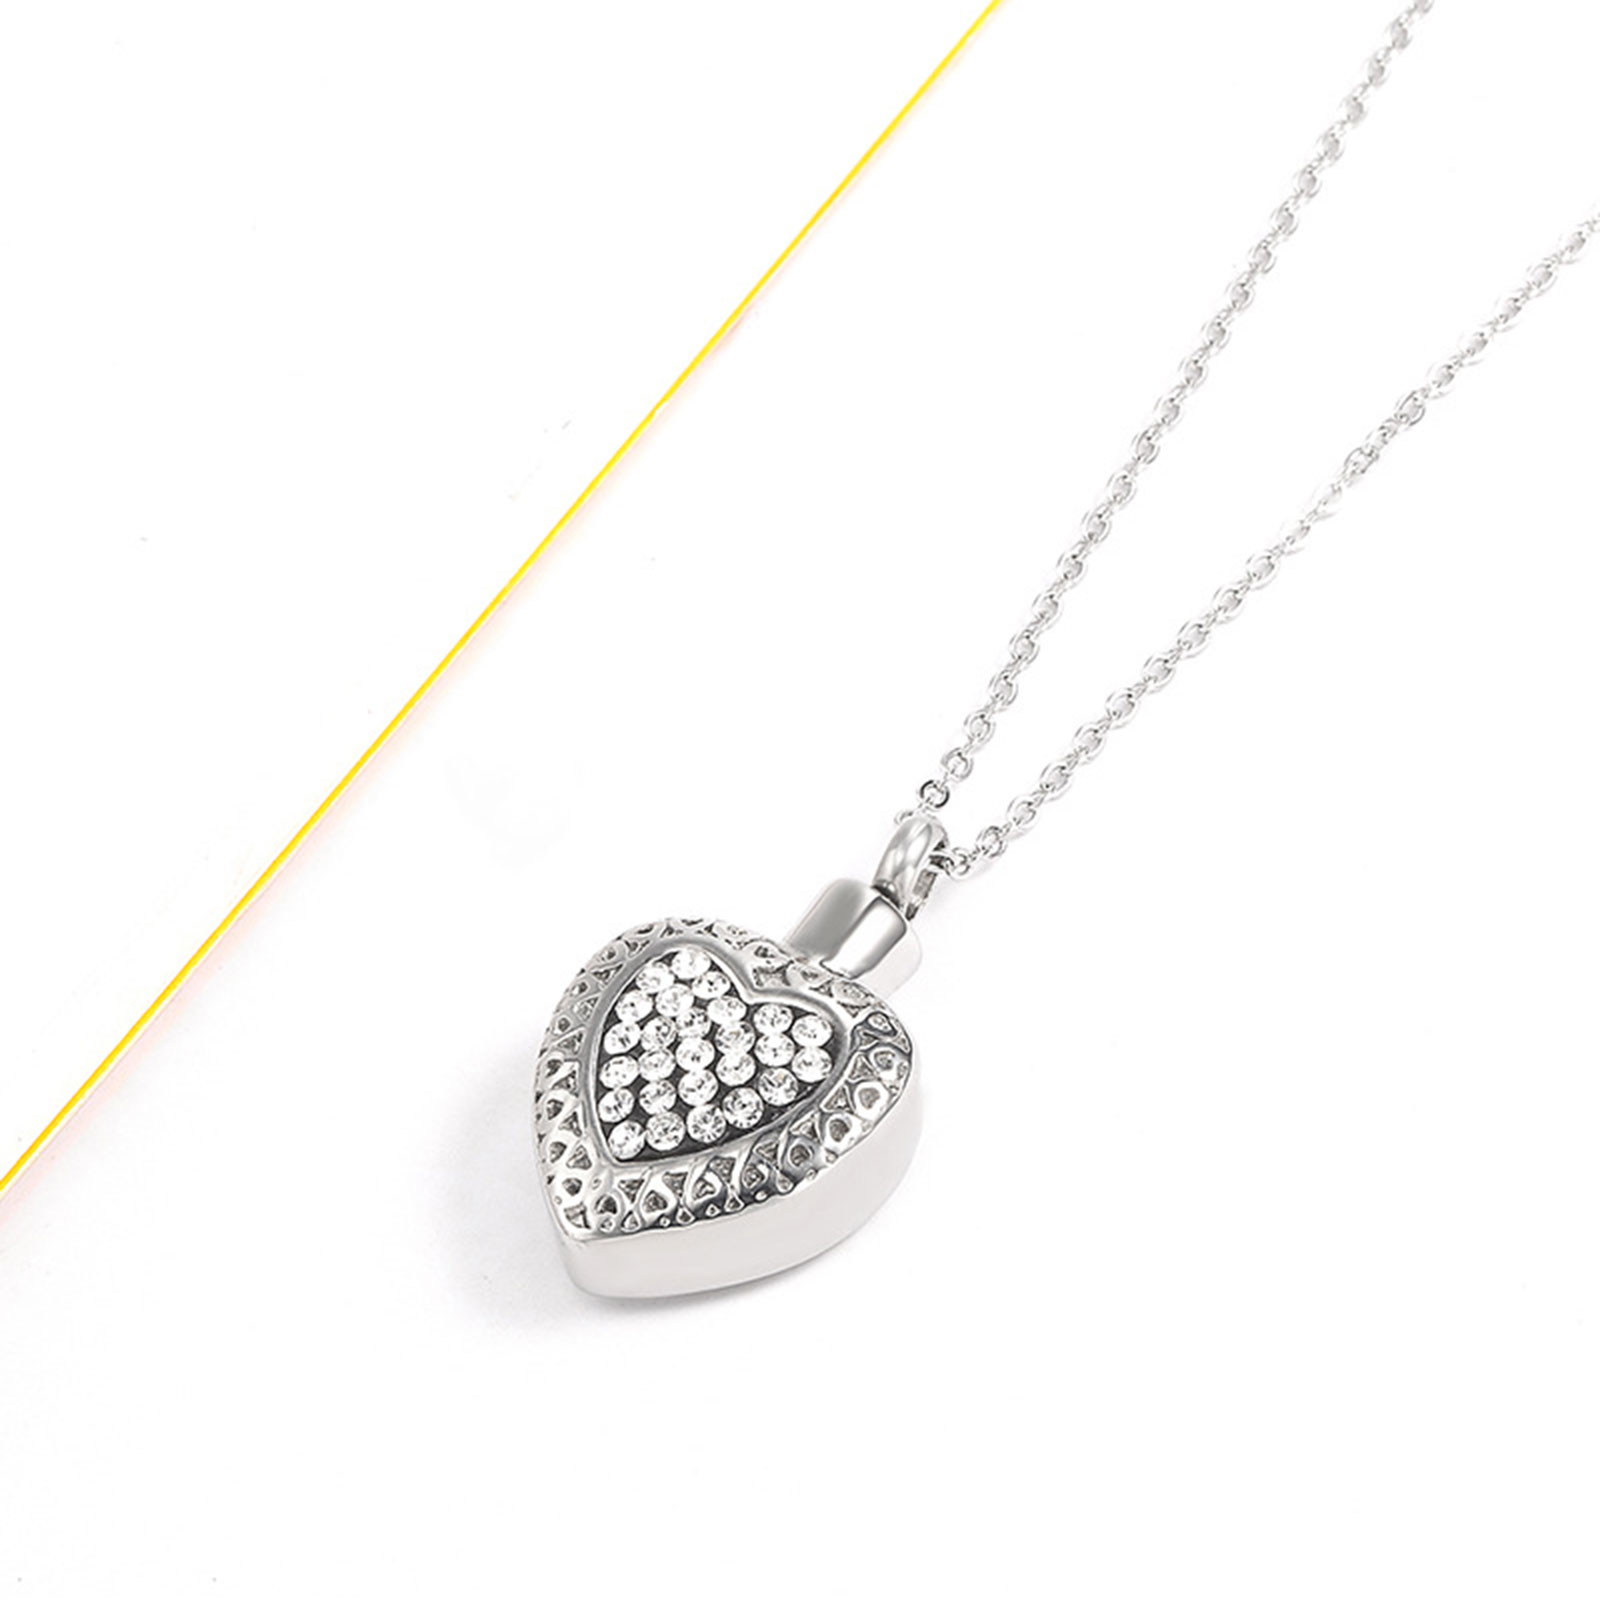 Stainless Steel Cremation Ash Urn Pendant Heart Can Open Clear Rhinestone DIY Necklace Bracelets Jewelry Accessories,1 PC